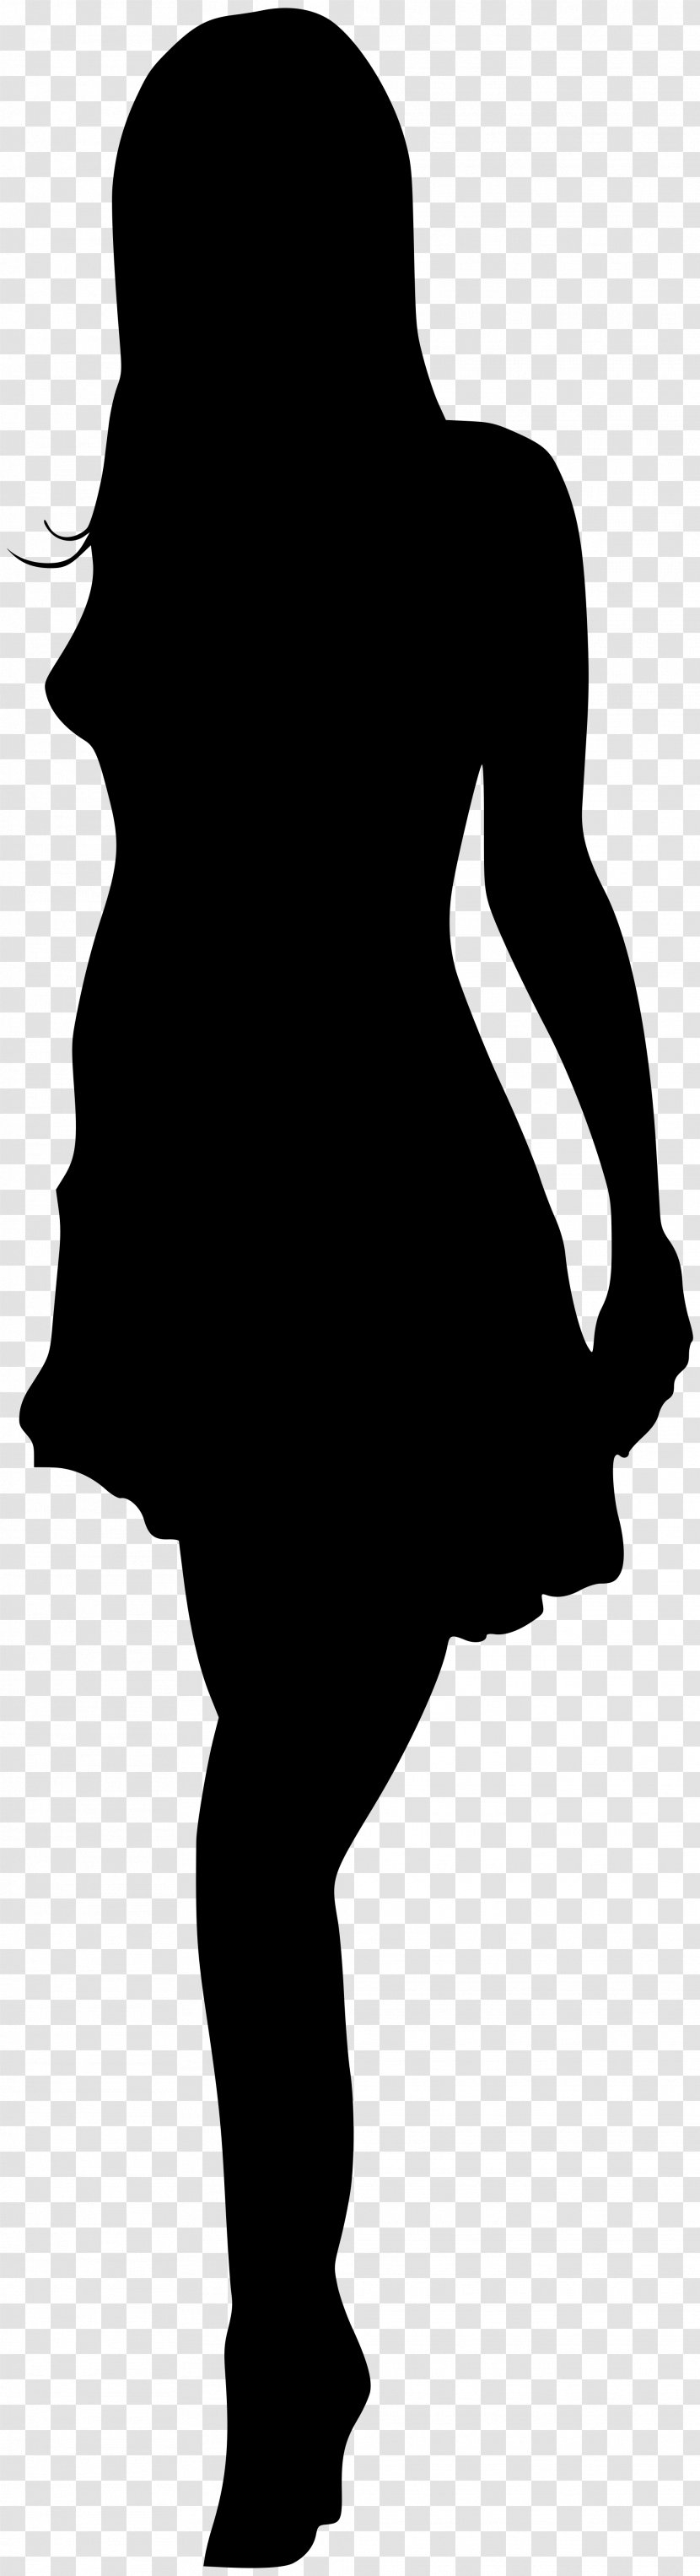 Silhouette Female Woman Wikimedia Commons - Video Transparent PNG